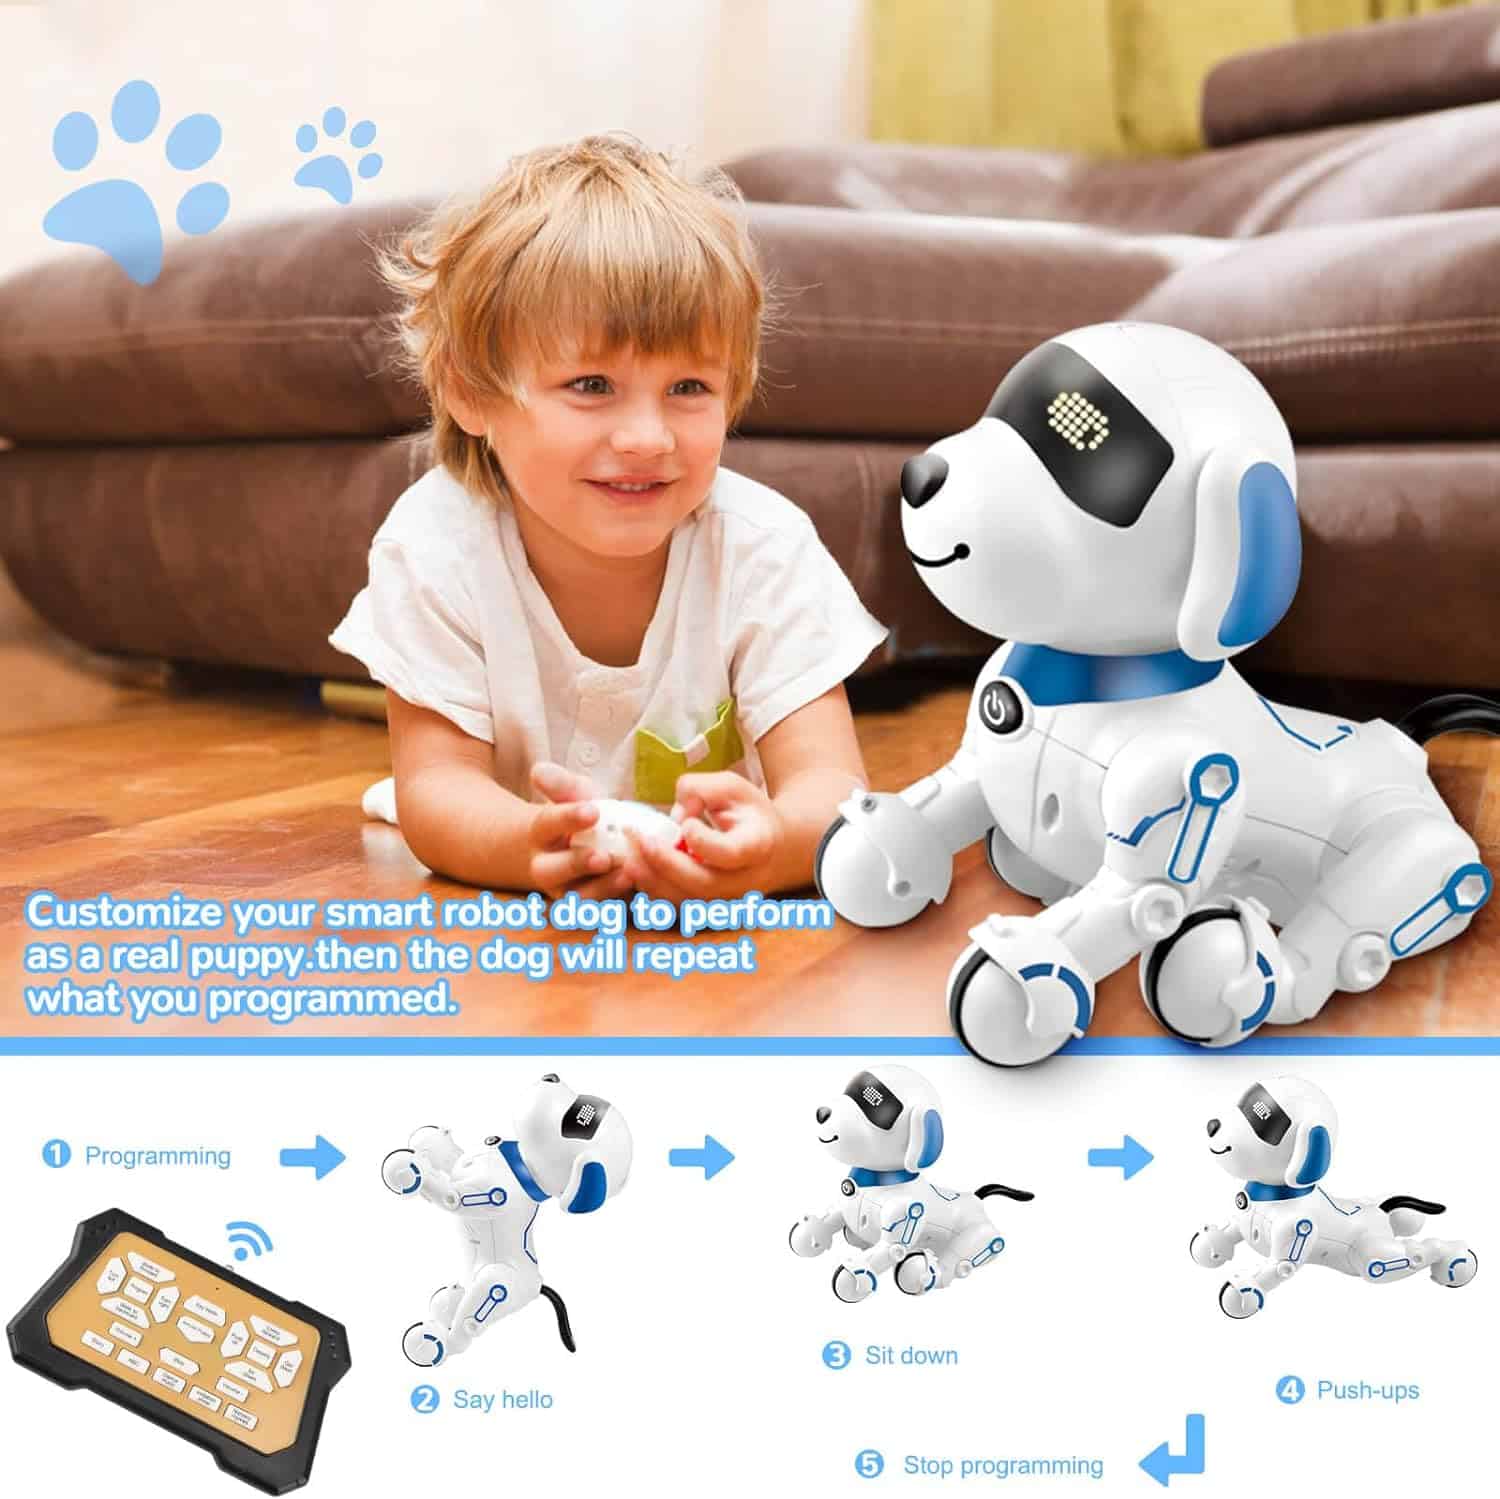 Britik Robot Dog Toys for Kids 8-12: A Fun and Educational Companion